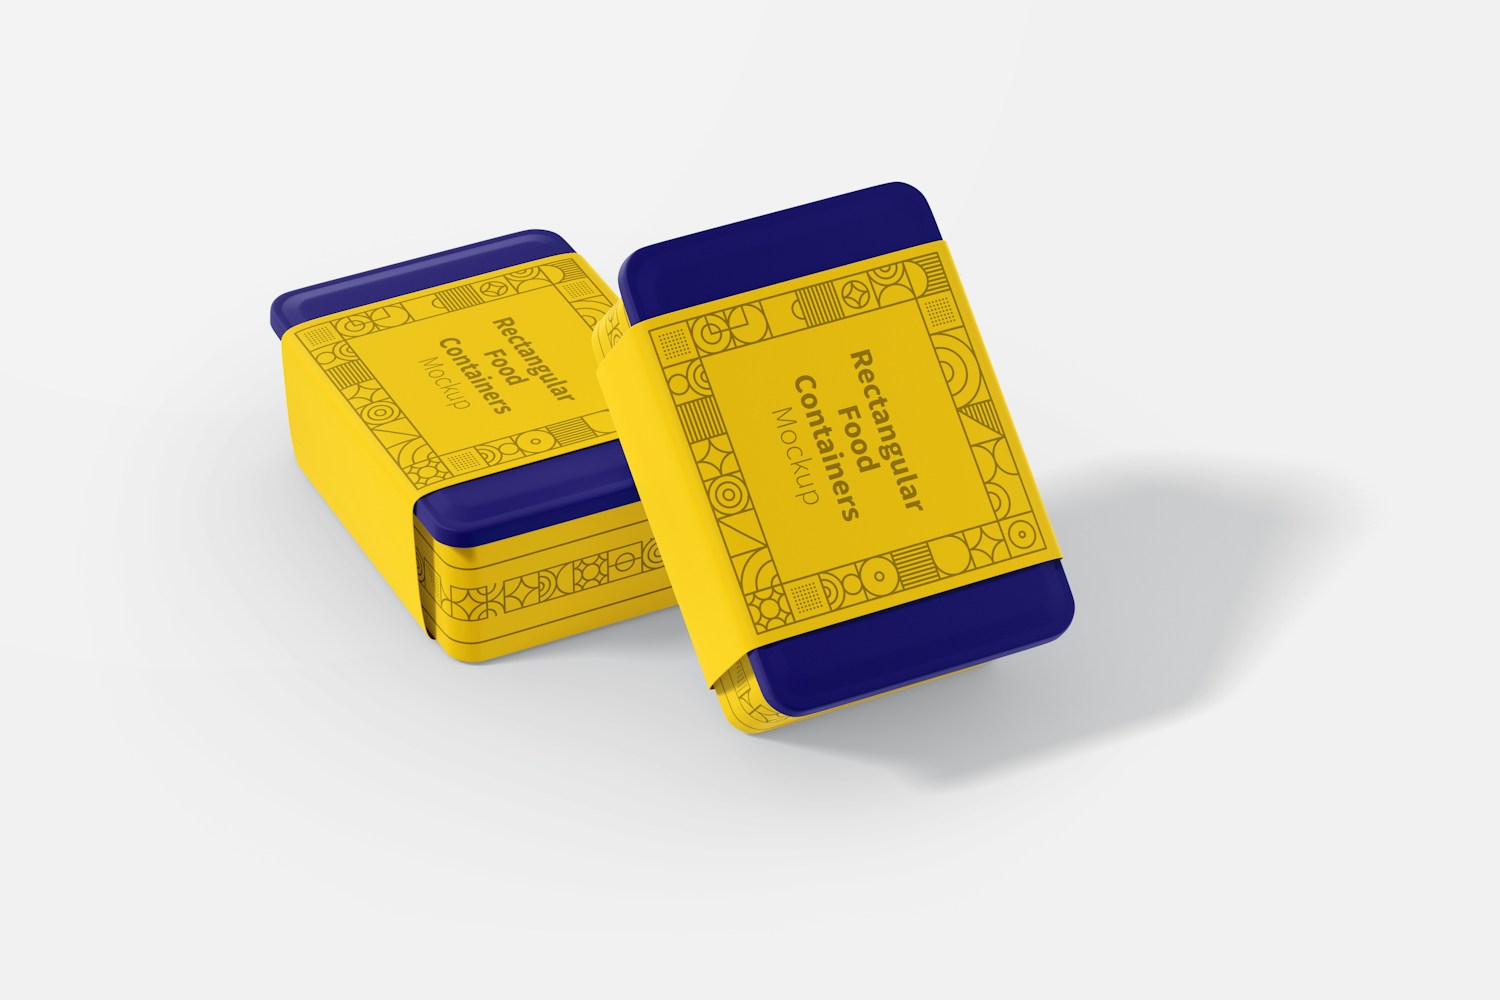 Rectangular Plastic Food Delivery Containers Mockup, Perspective